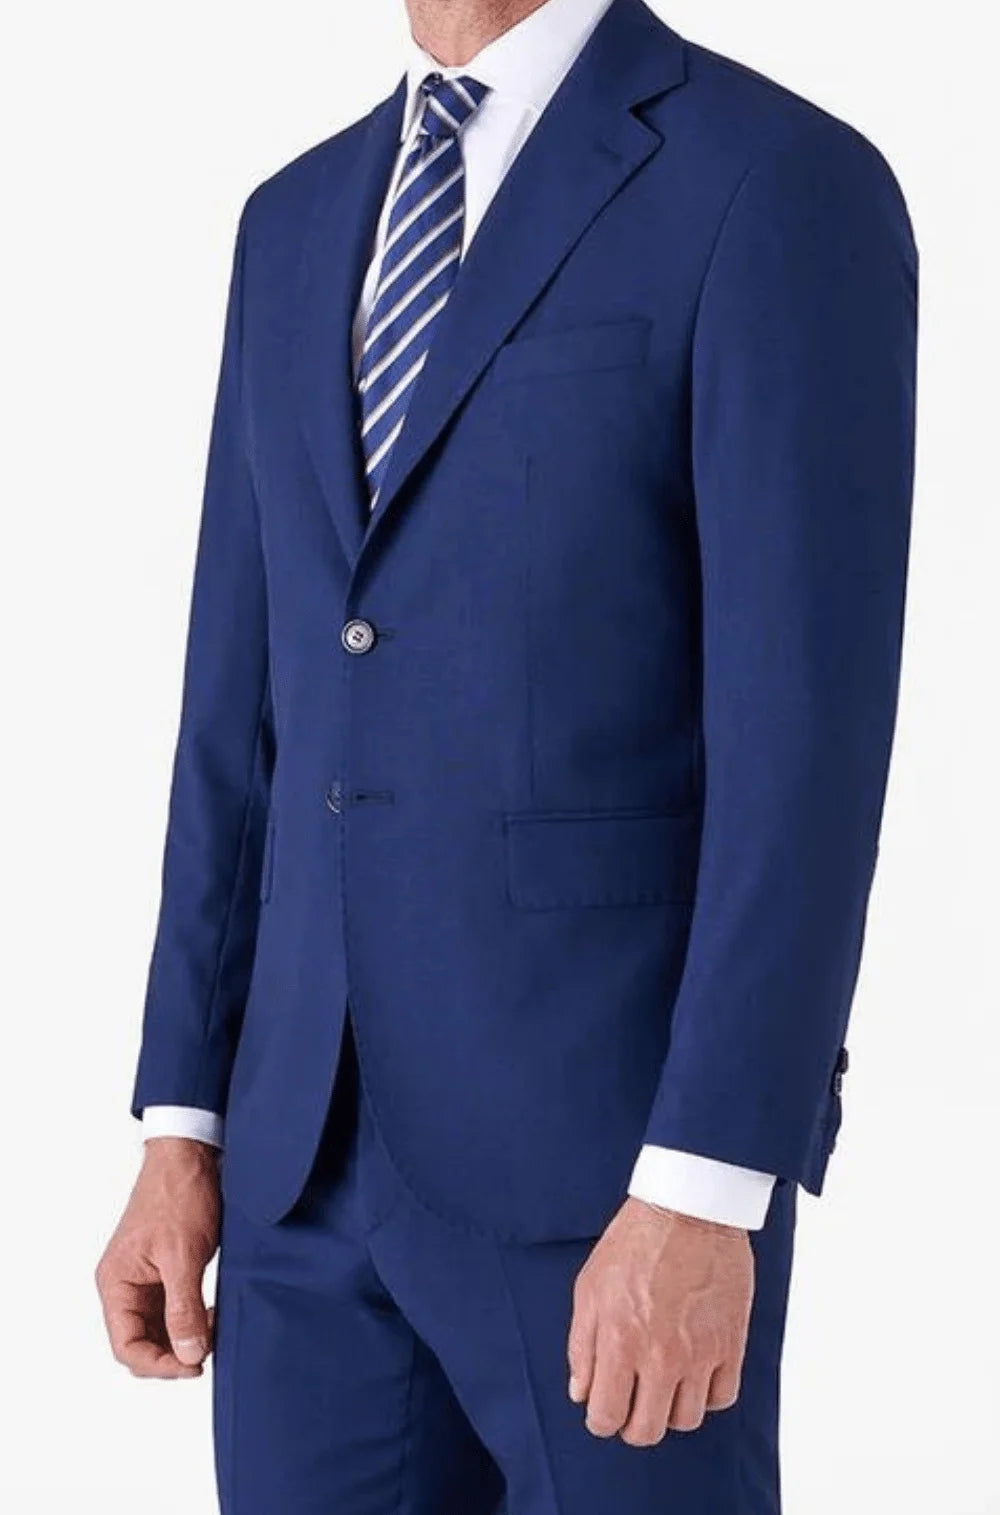 Men's Fusaro Max Classic Wool Blend Suit In Blue (21107) - available in-store, 337 Monty Naicker Street, Durban CBD or online at Omar's Tailors & Outfitters online store.   A men's fashion curation for South African men - established in 1911.